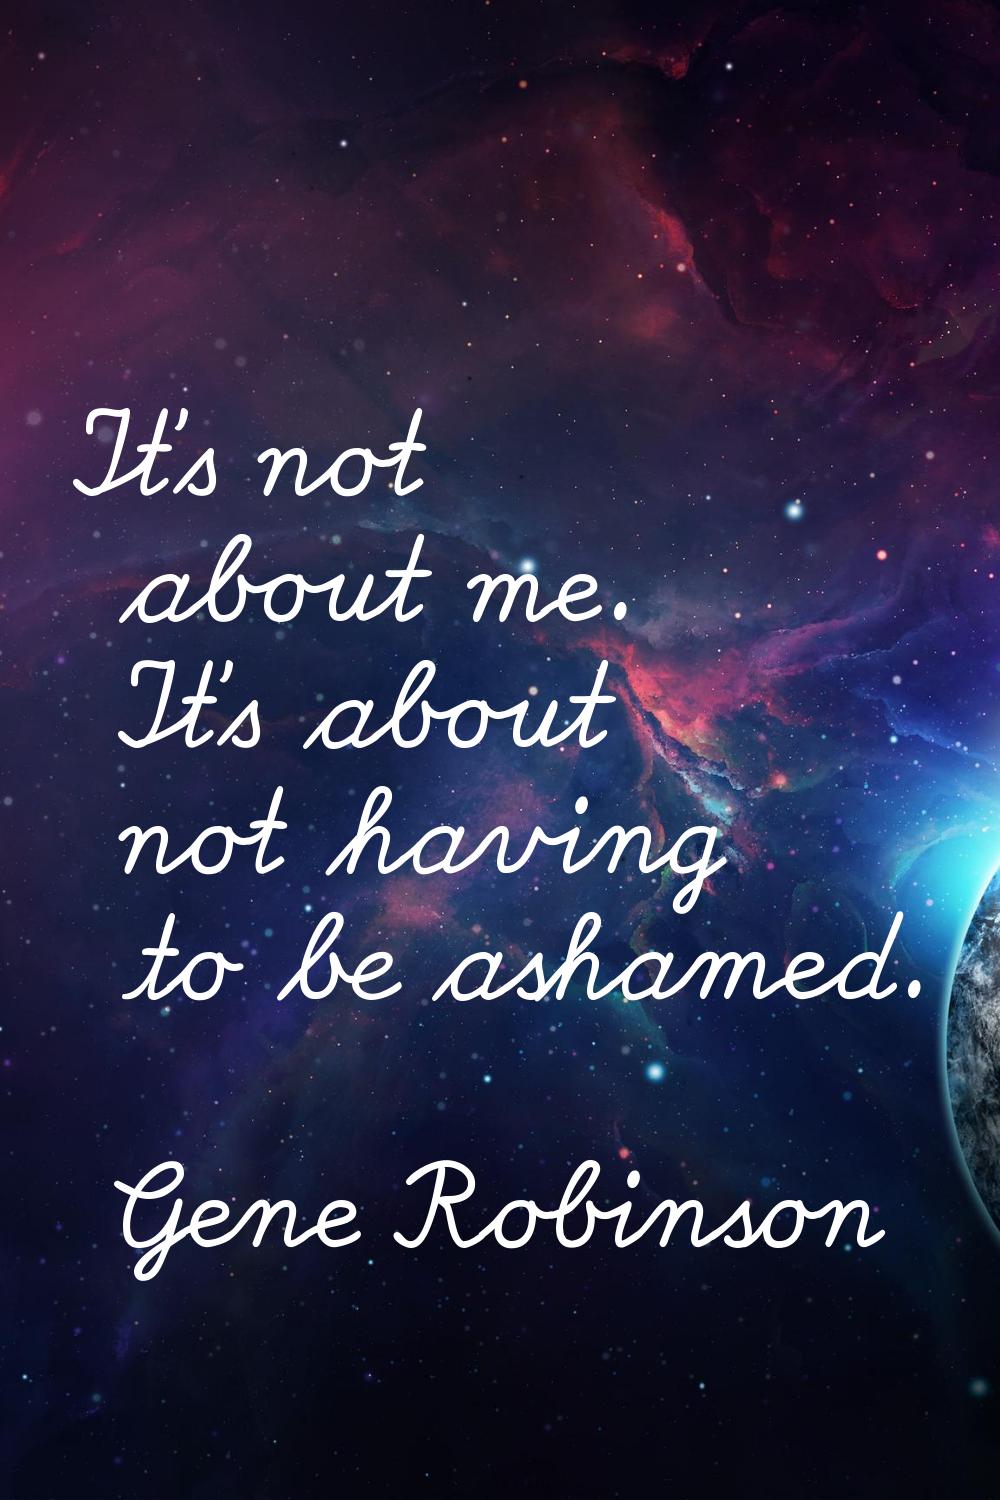 It's not about me. It's about not having to be ashamed.